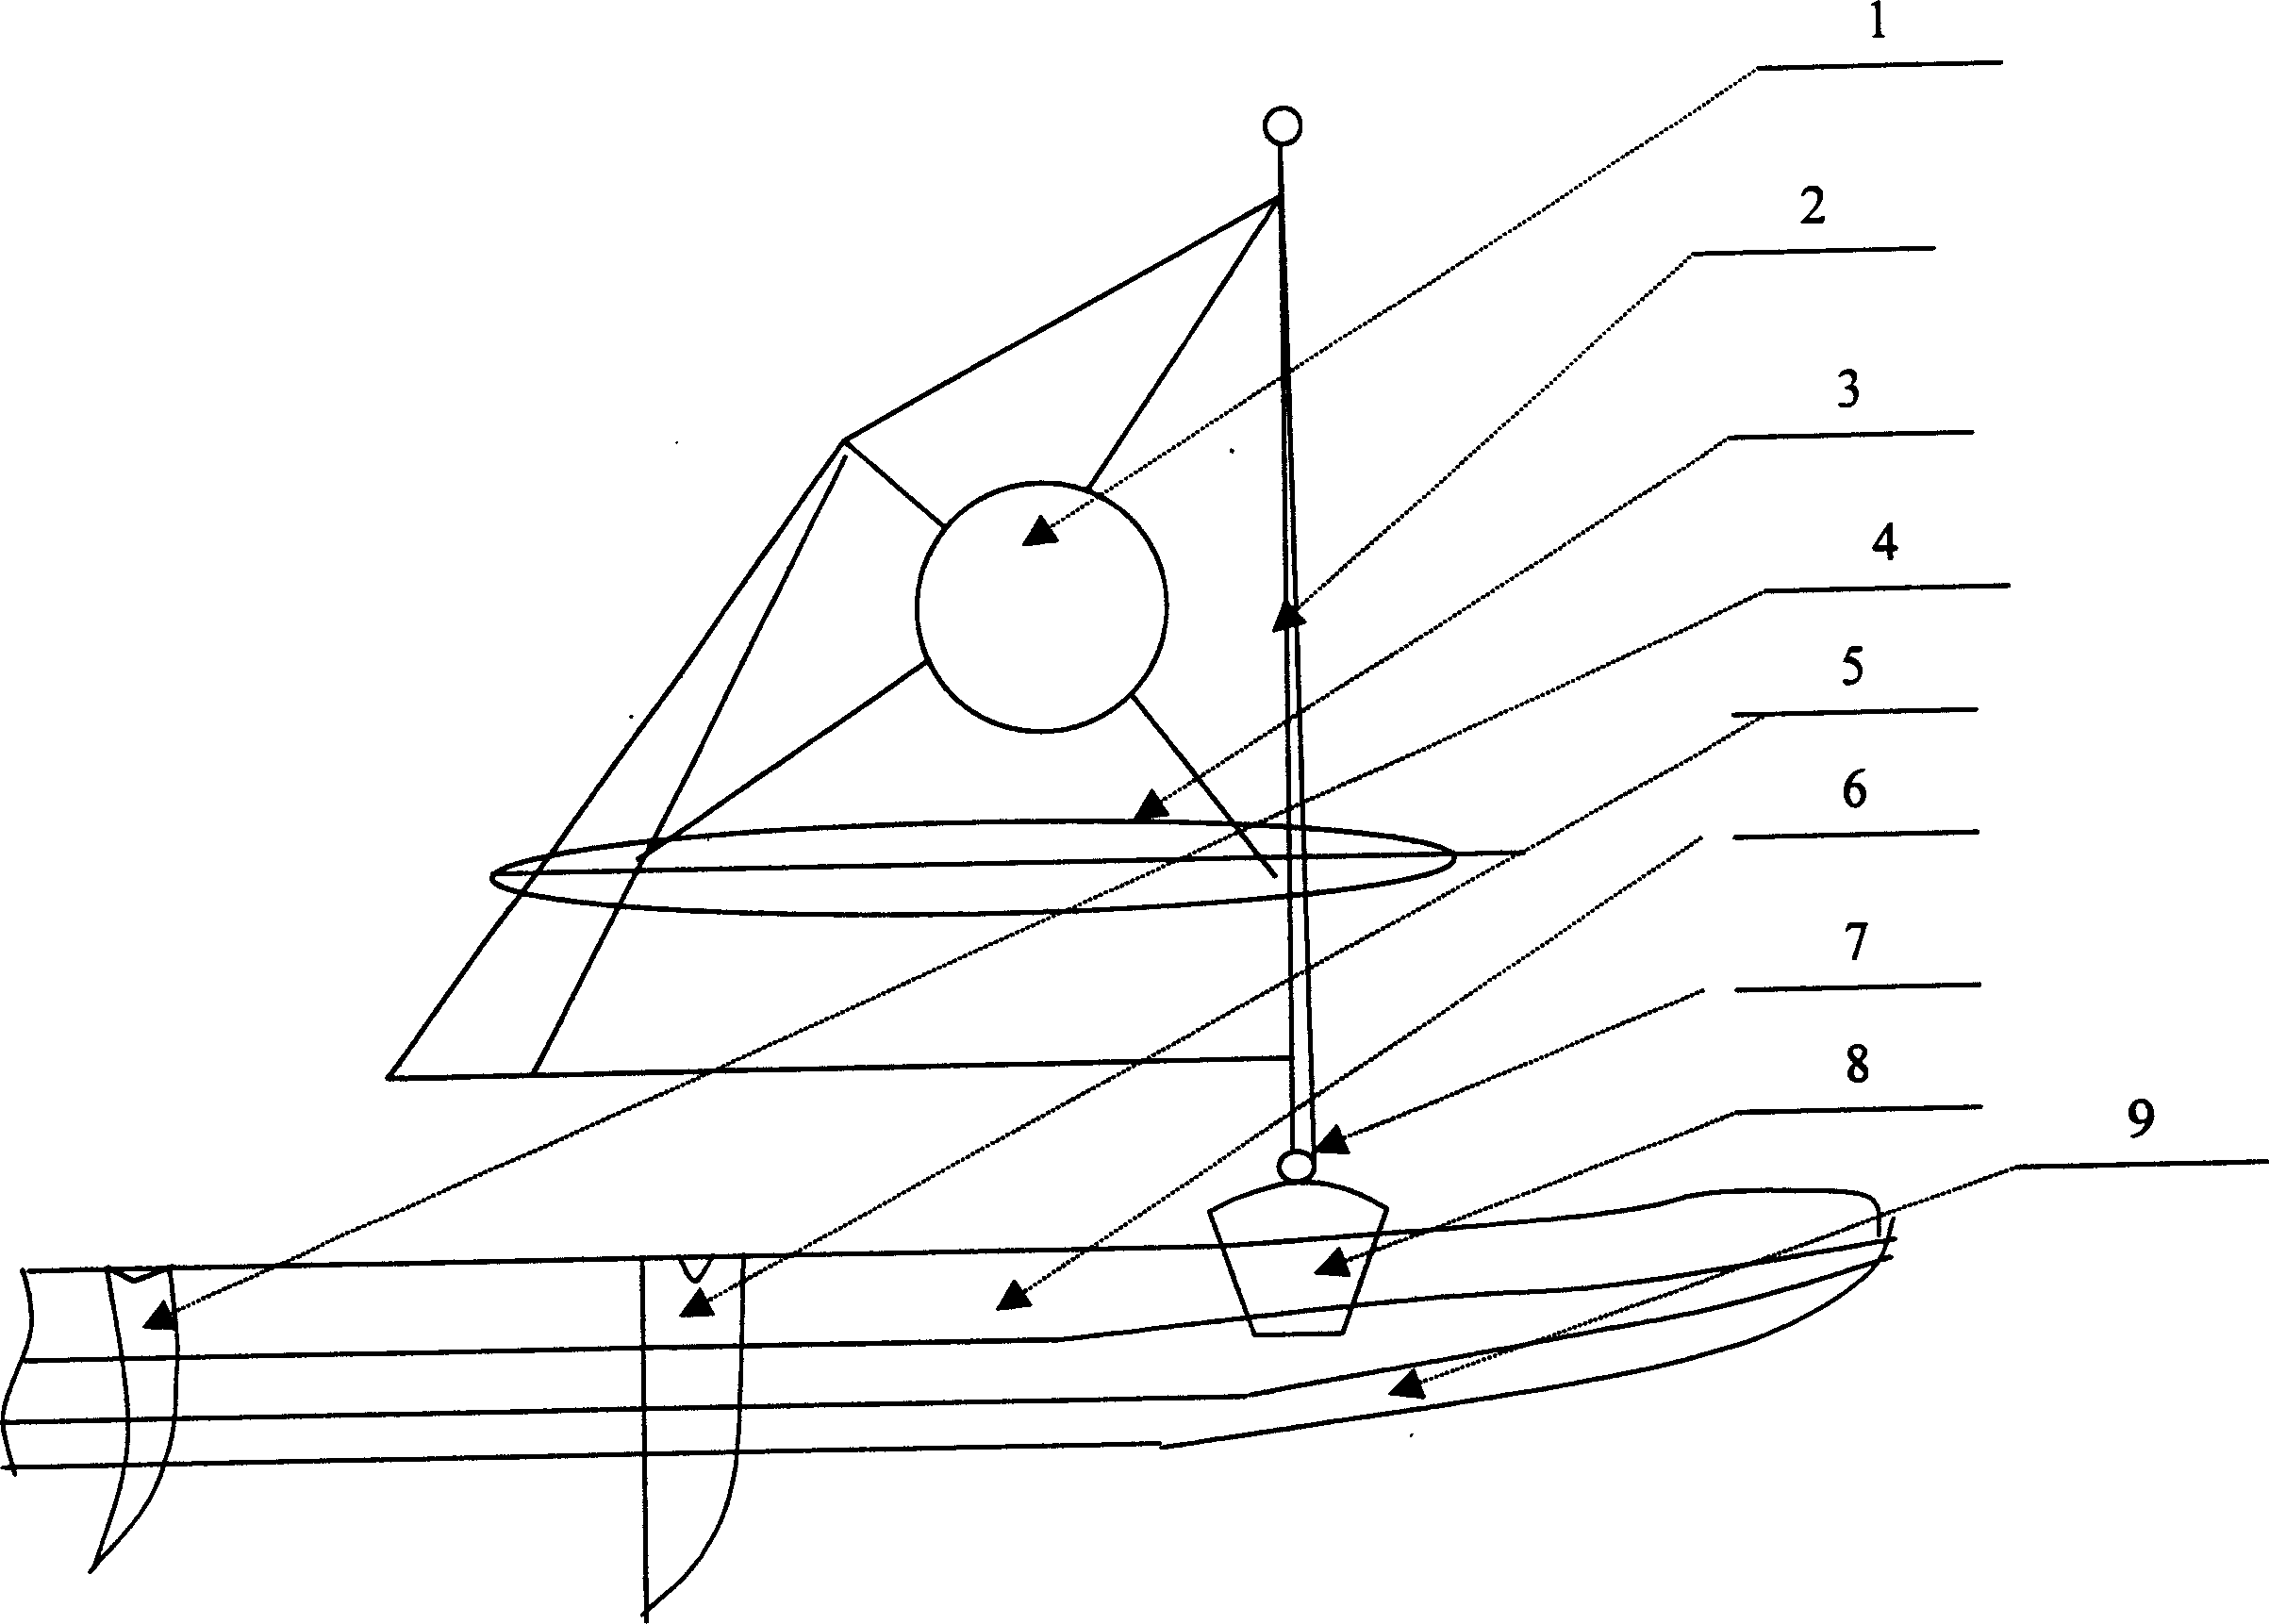 V-type double floating body style broad sailboard